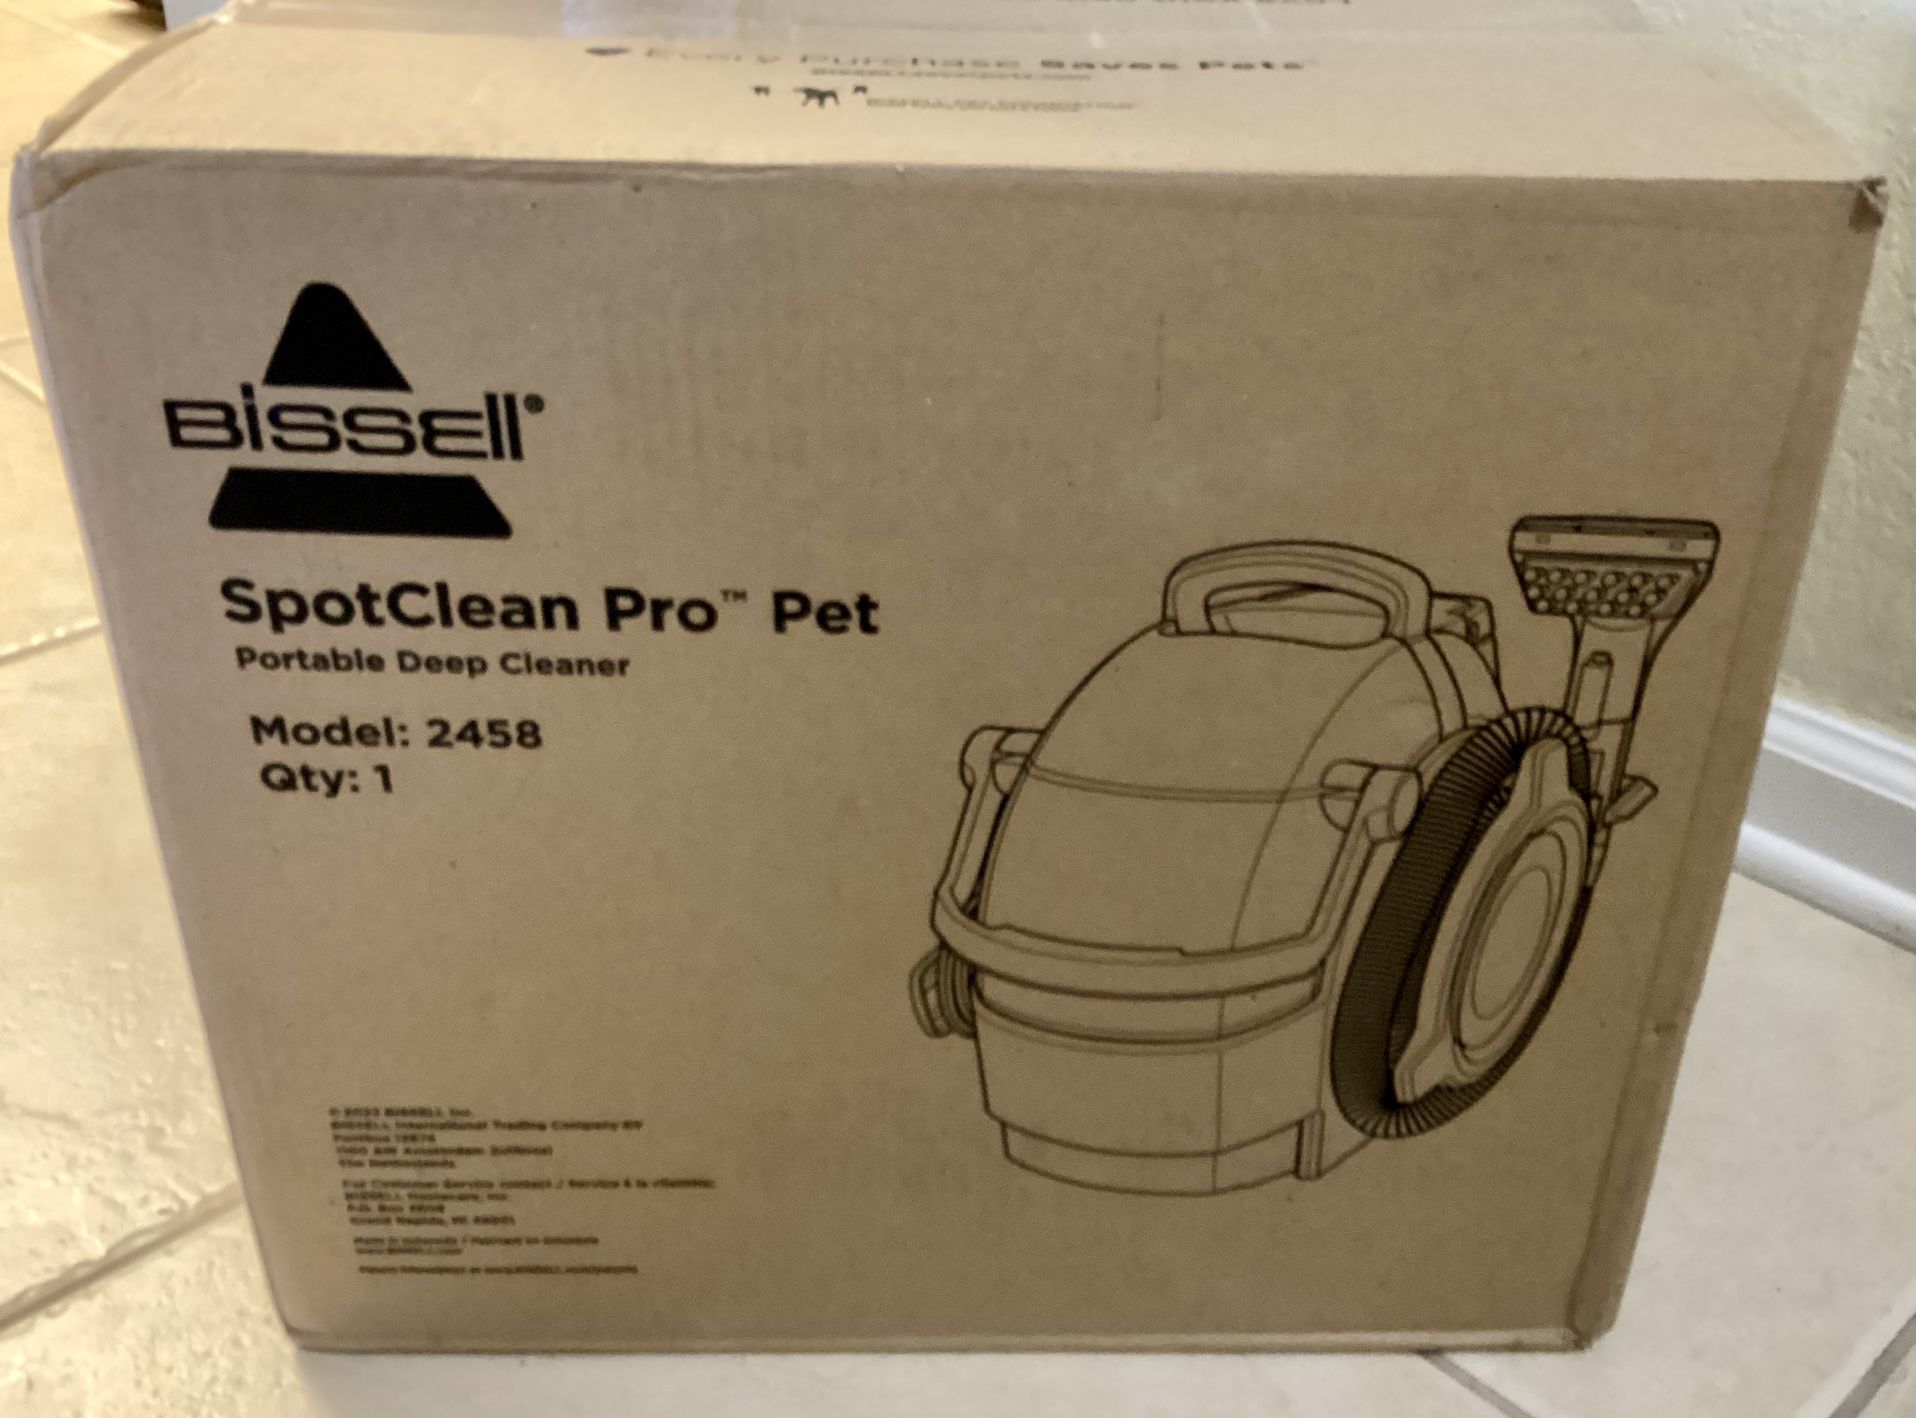 BRAND NEW - Bissell SpotClean Pro Pet